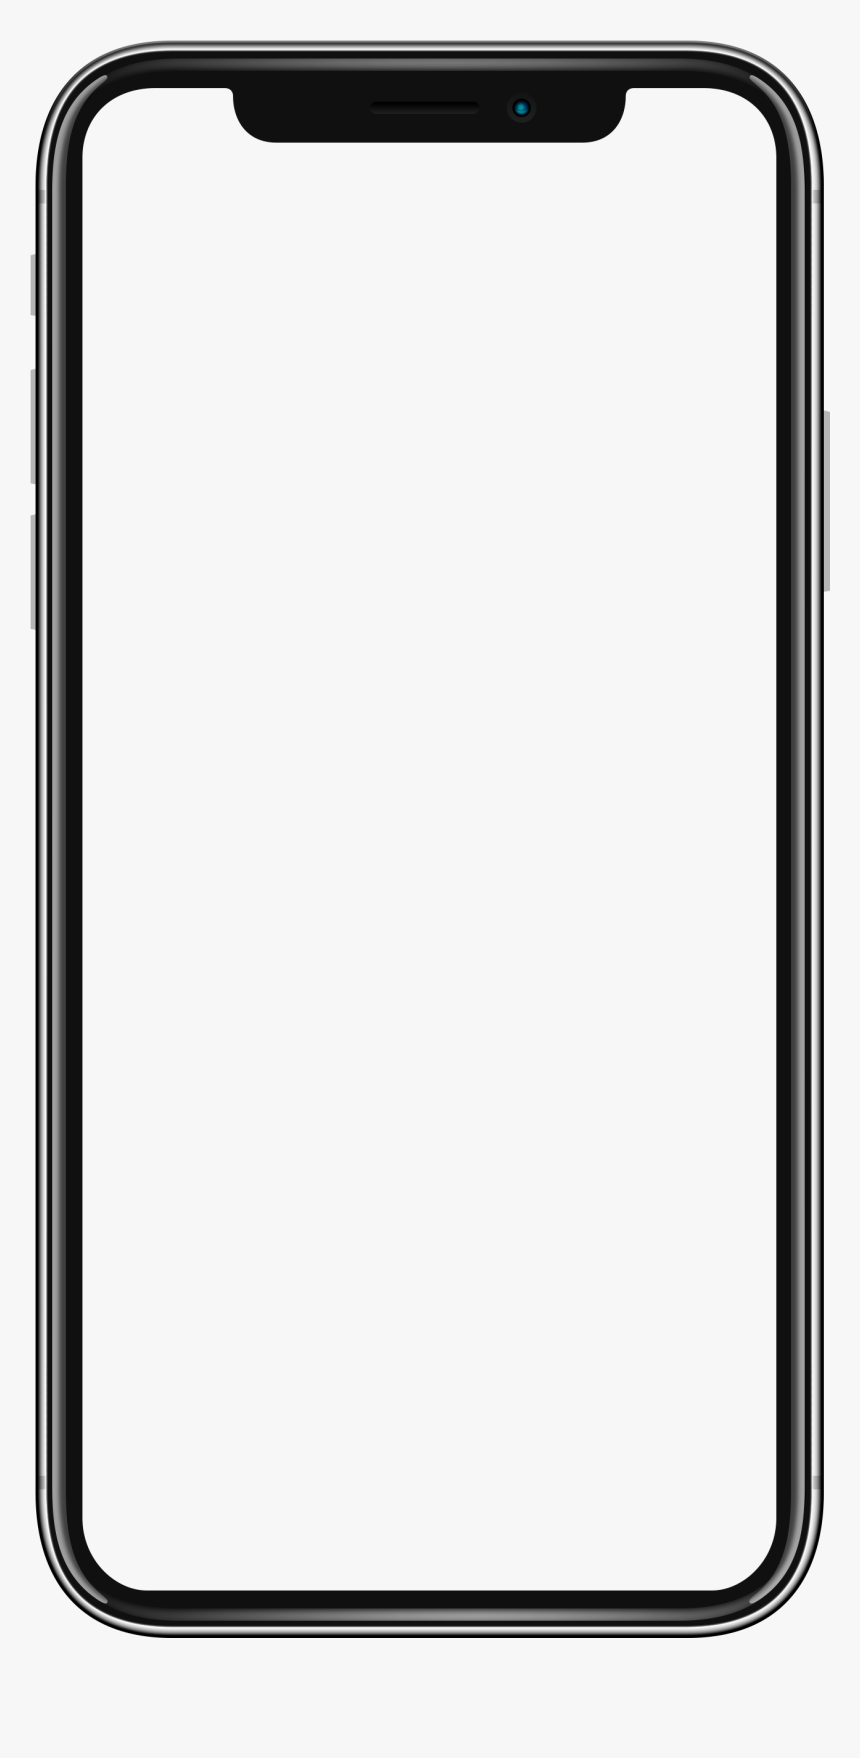 Mockup Iphone X Png Image Free Download Searchpng - Iphone X Outline Transparent